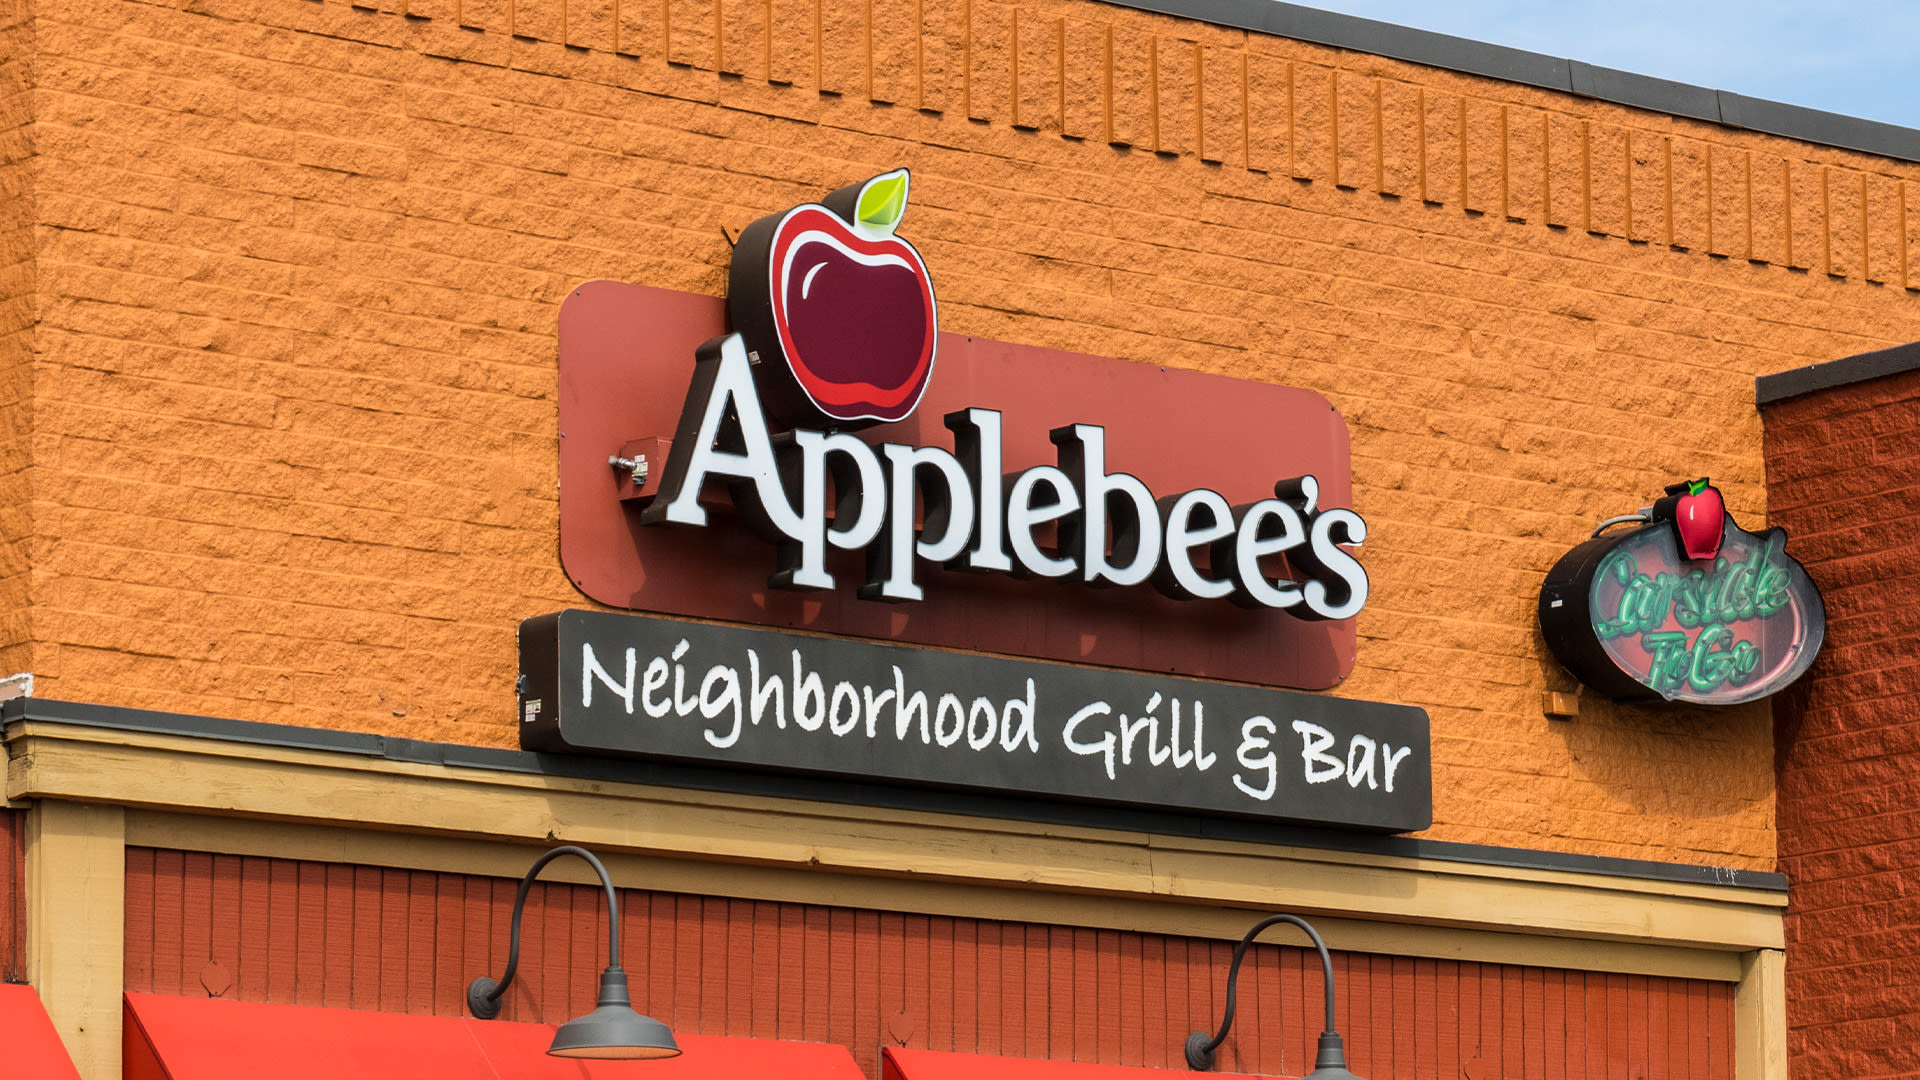 Applebee's confirms over 20 stores to close - but there's silver lining for fans